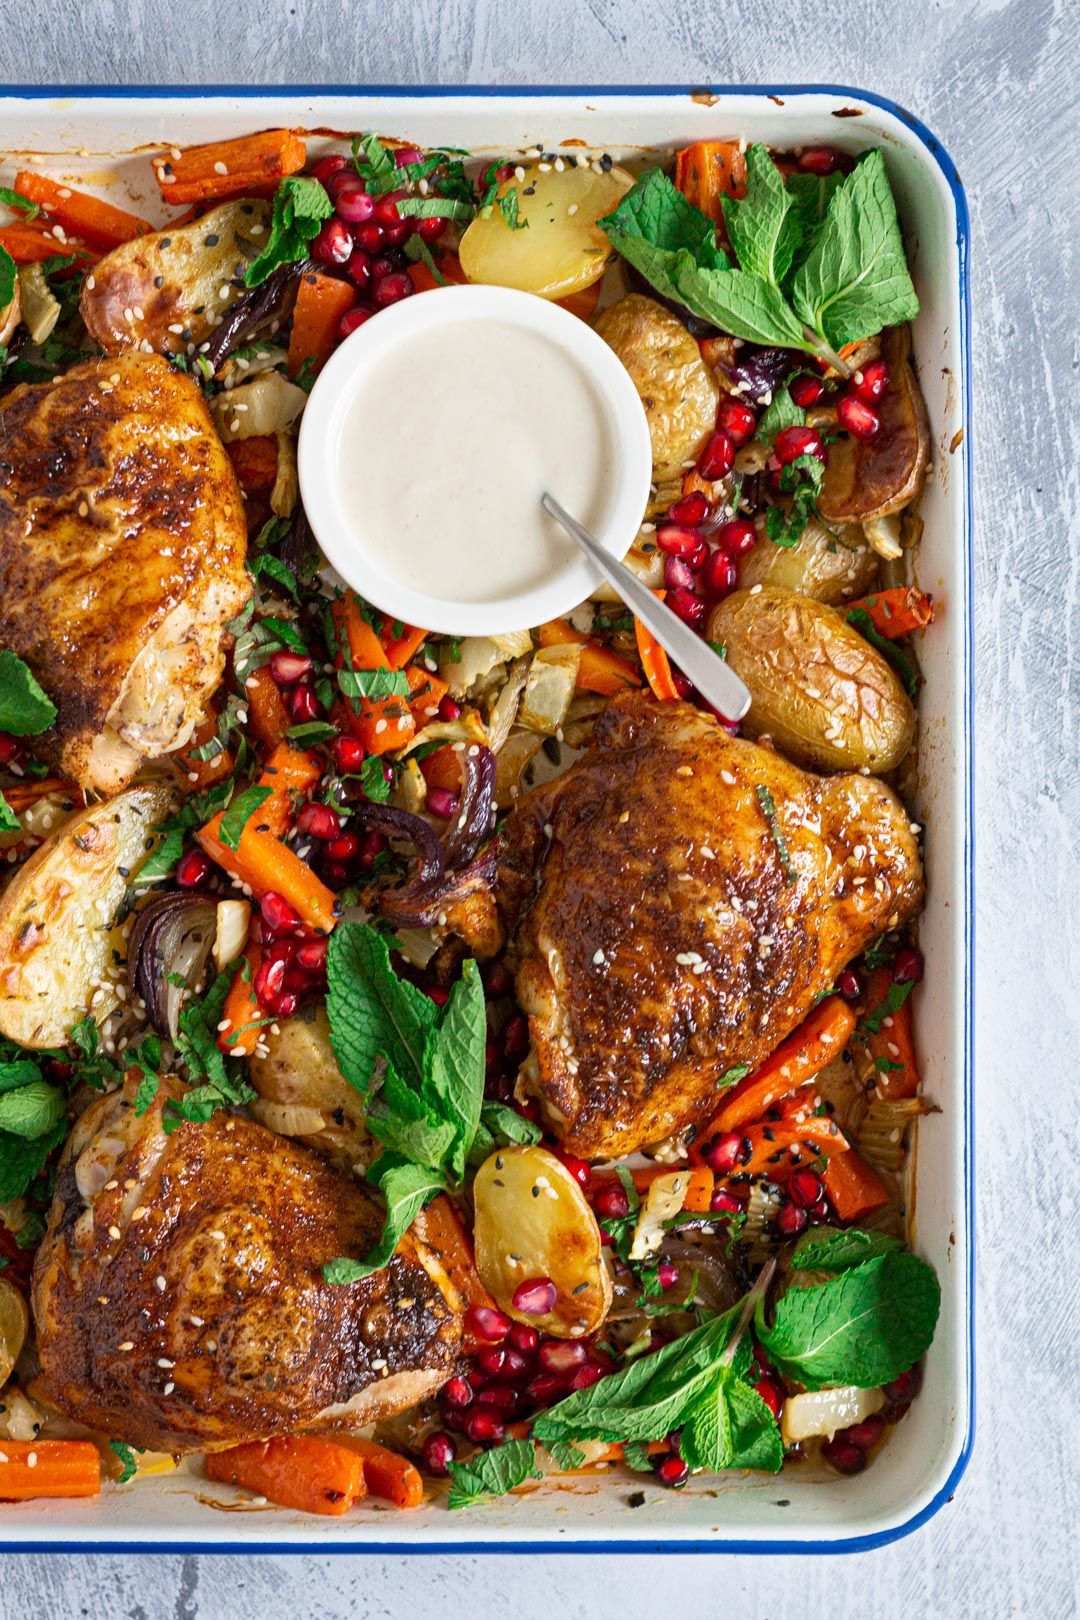 Chicken with za'atar and roasted vegetables